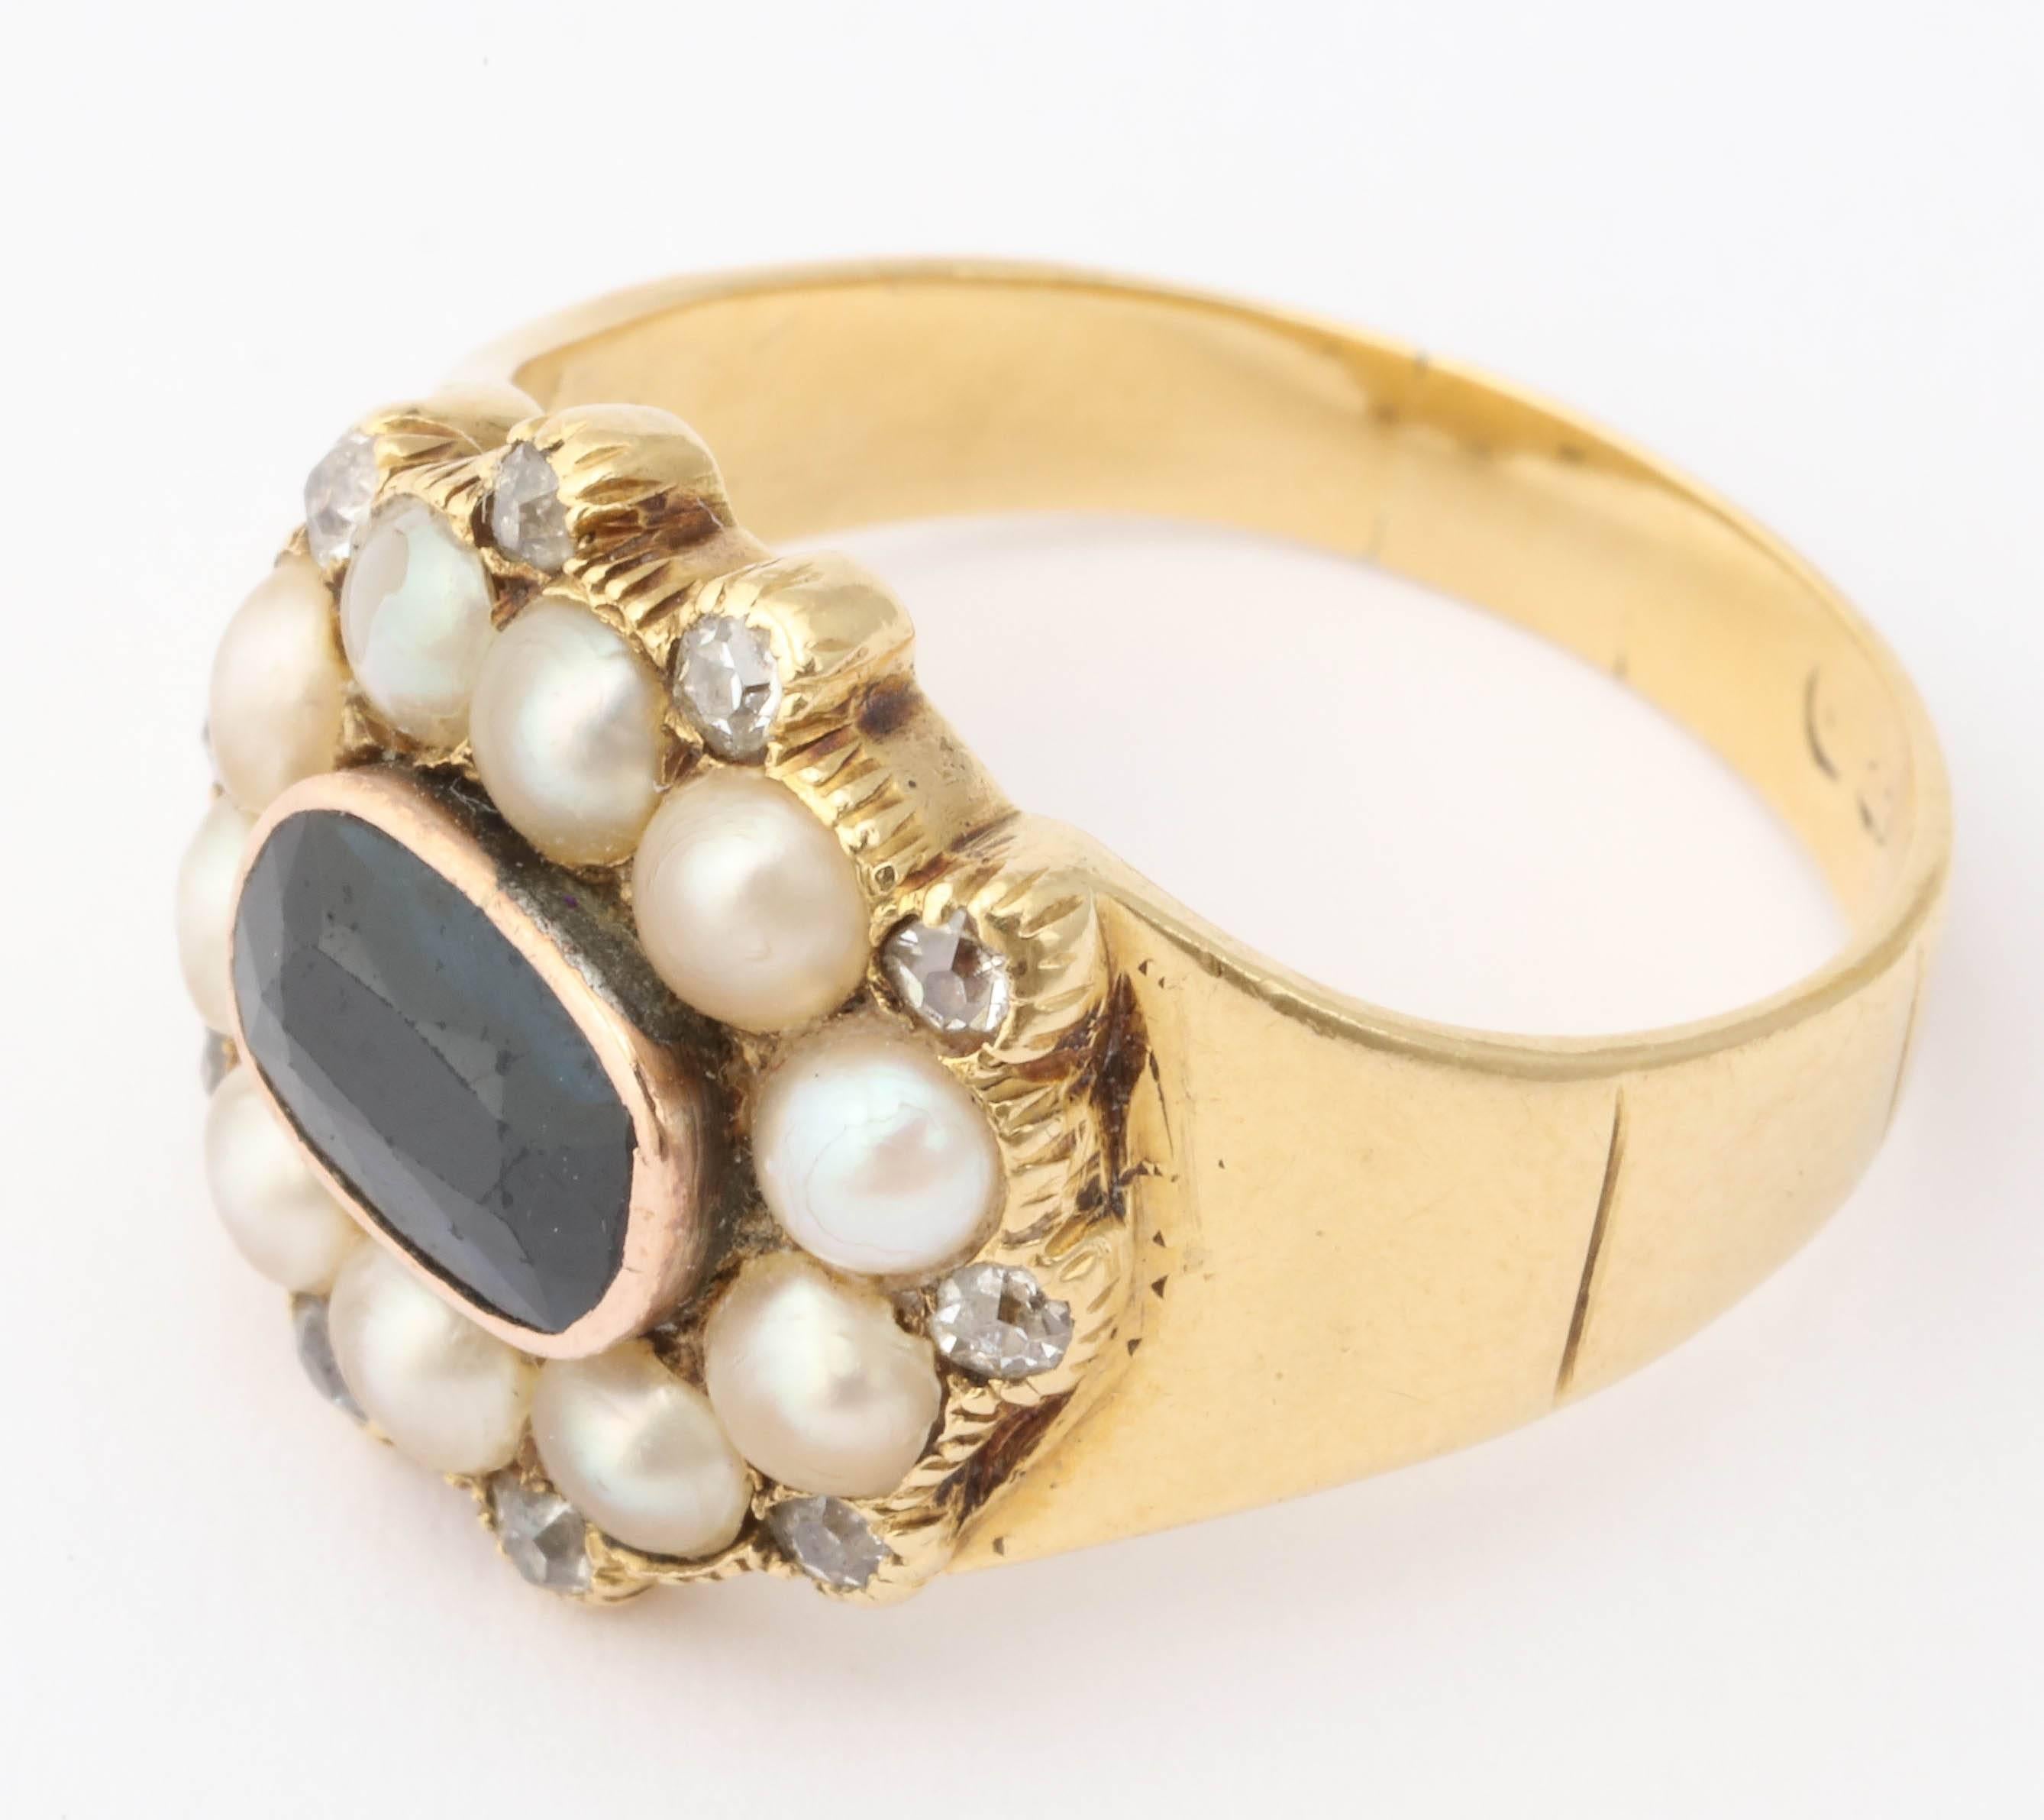 Far more lovely in person is the arresting early Victorian ring, from the young years of Queen Victoria. set with rich blue natural sapphire, creamy white natural pearls and bordered by diamonds in glowing combination. The darker pearls of the photo